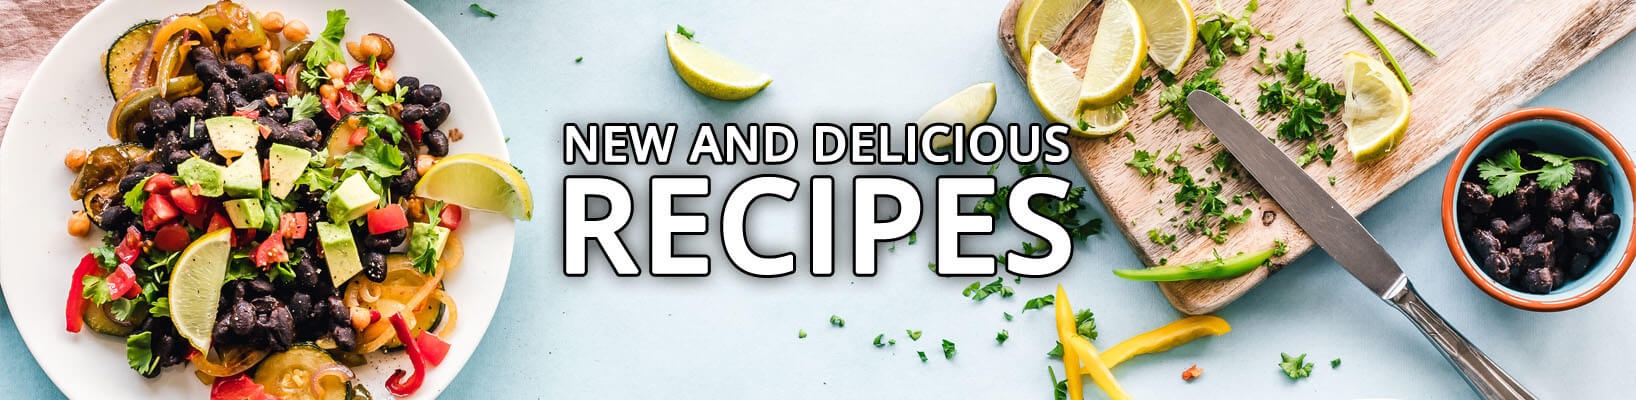 New and Delicious Recipes